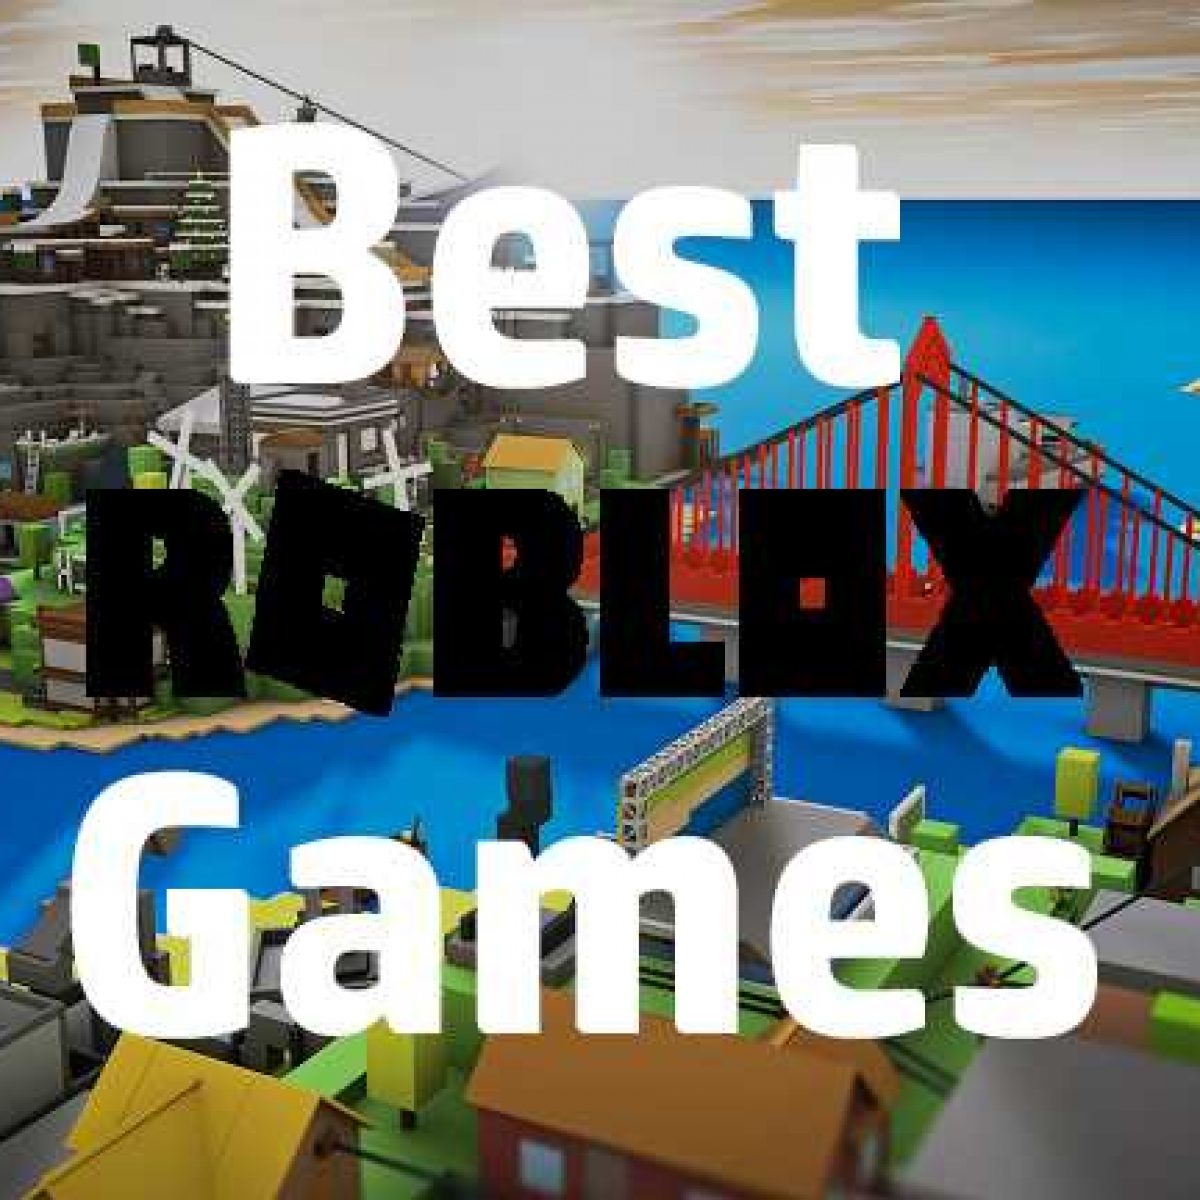 15 Best Roblox Games To Play In 2020 Must Play - roblox assassin codes 2017 november